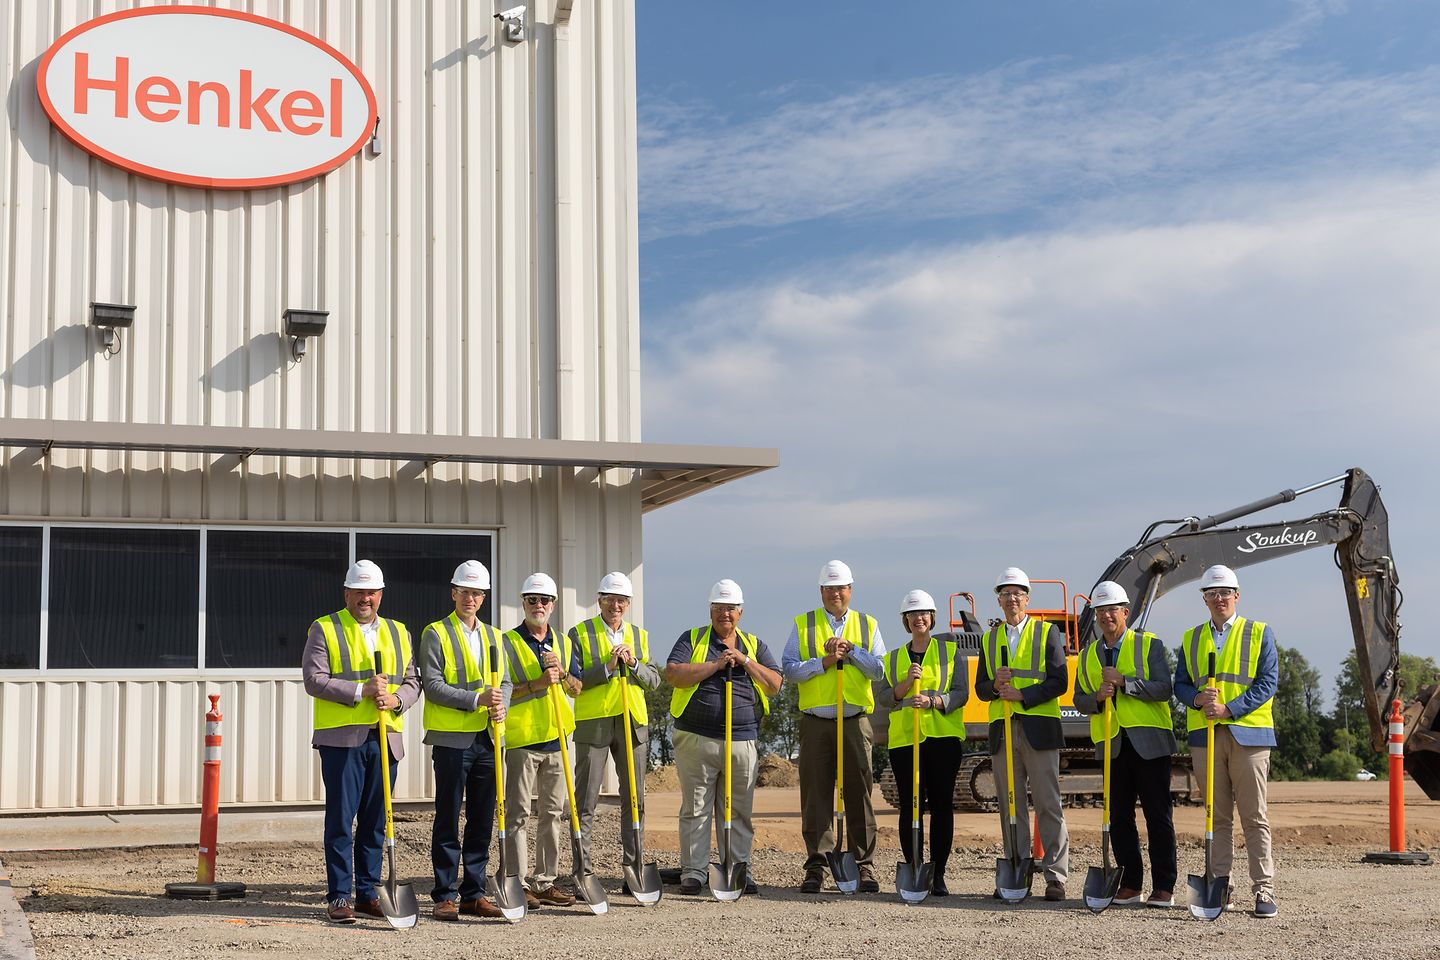 Henkel Adhesive Technologies has begun construction for the expansion of its Brandon, South Dakota facility